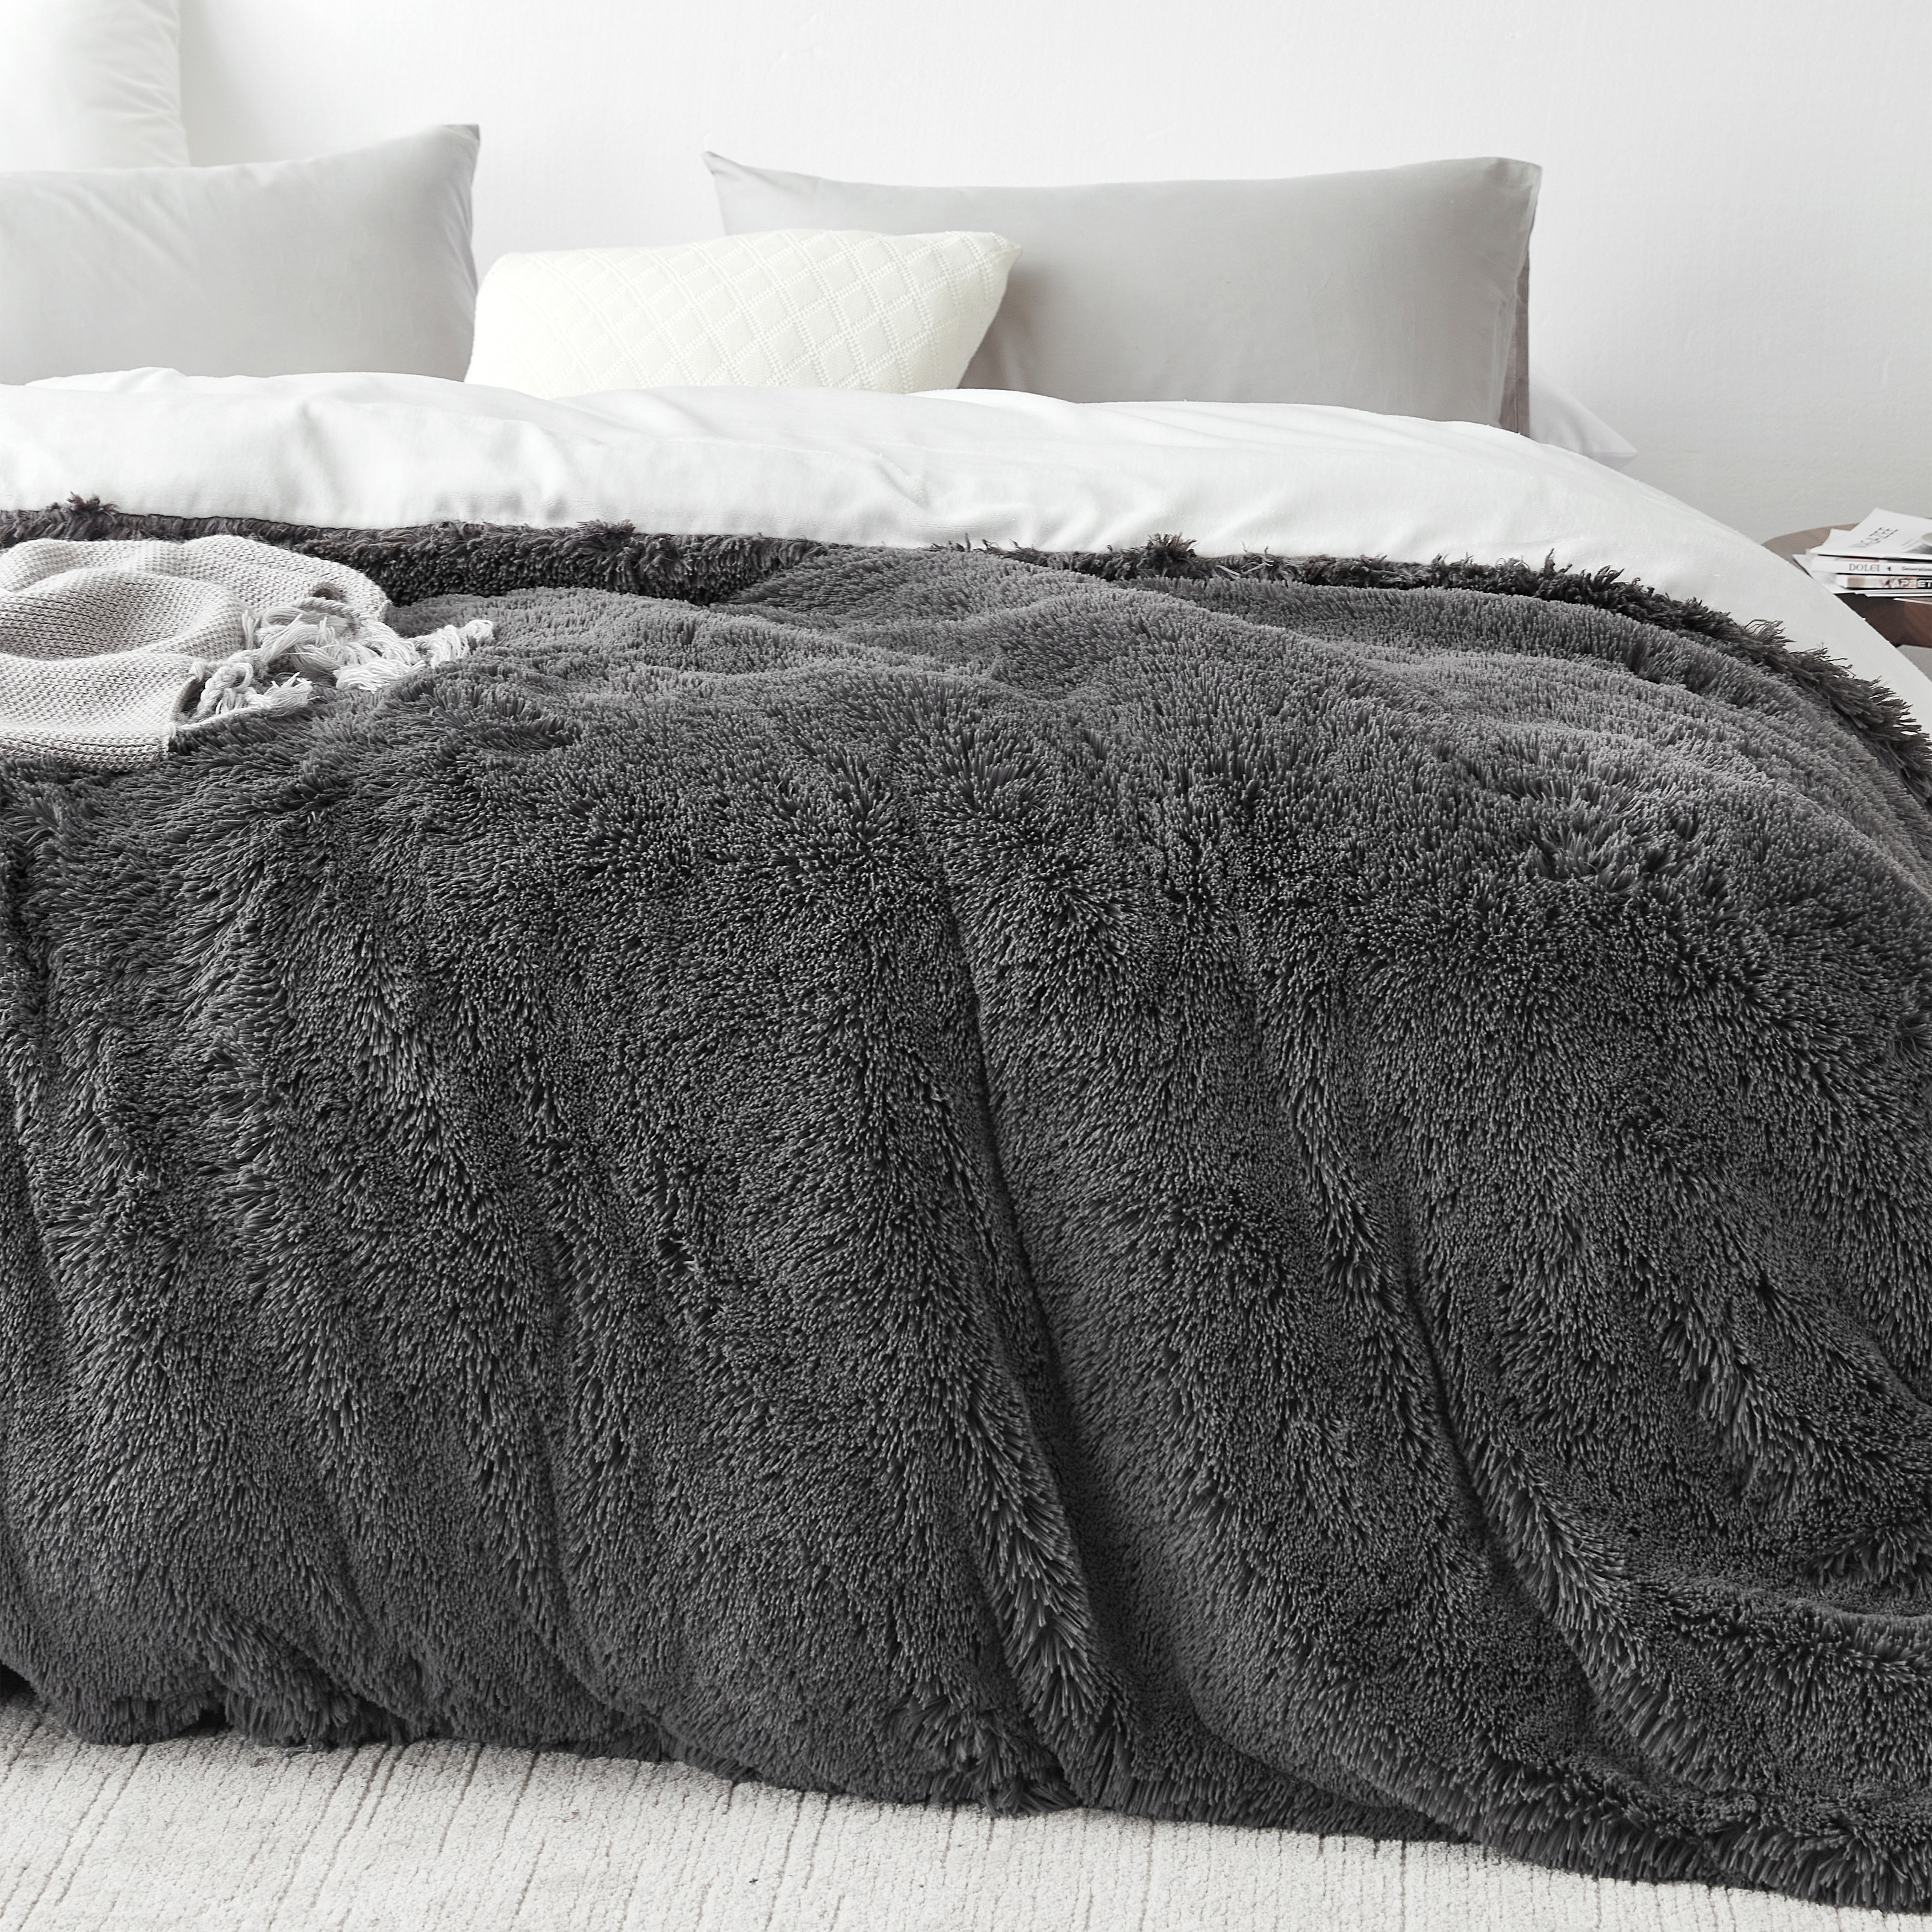 Are You Kidding? - Coma Inducer® King Duvet Cover - Charcoal/White